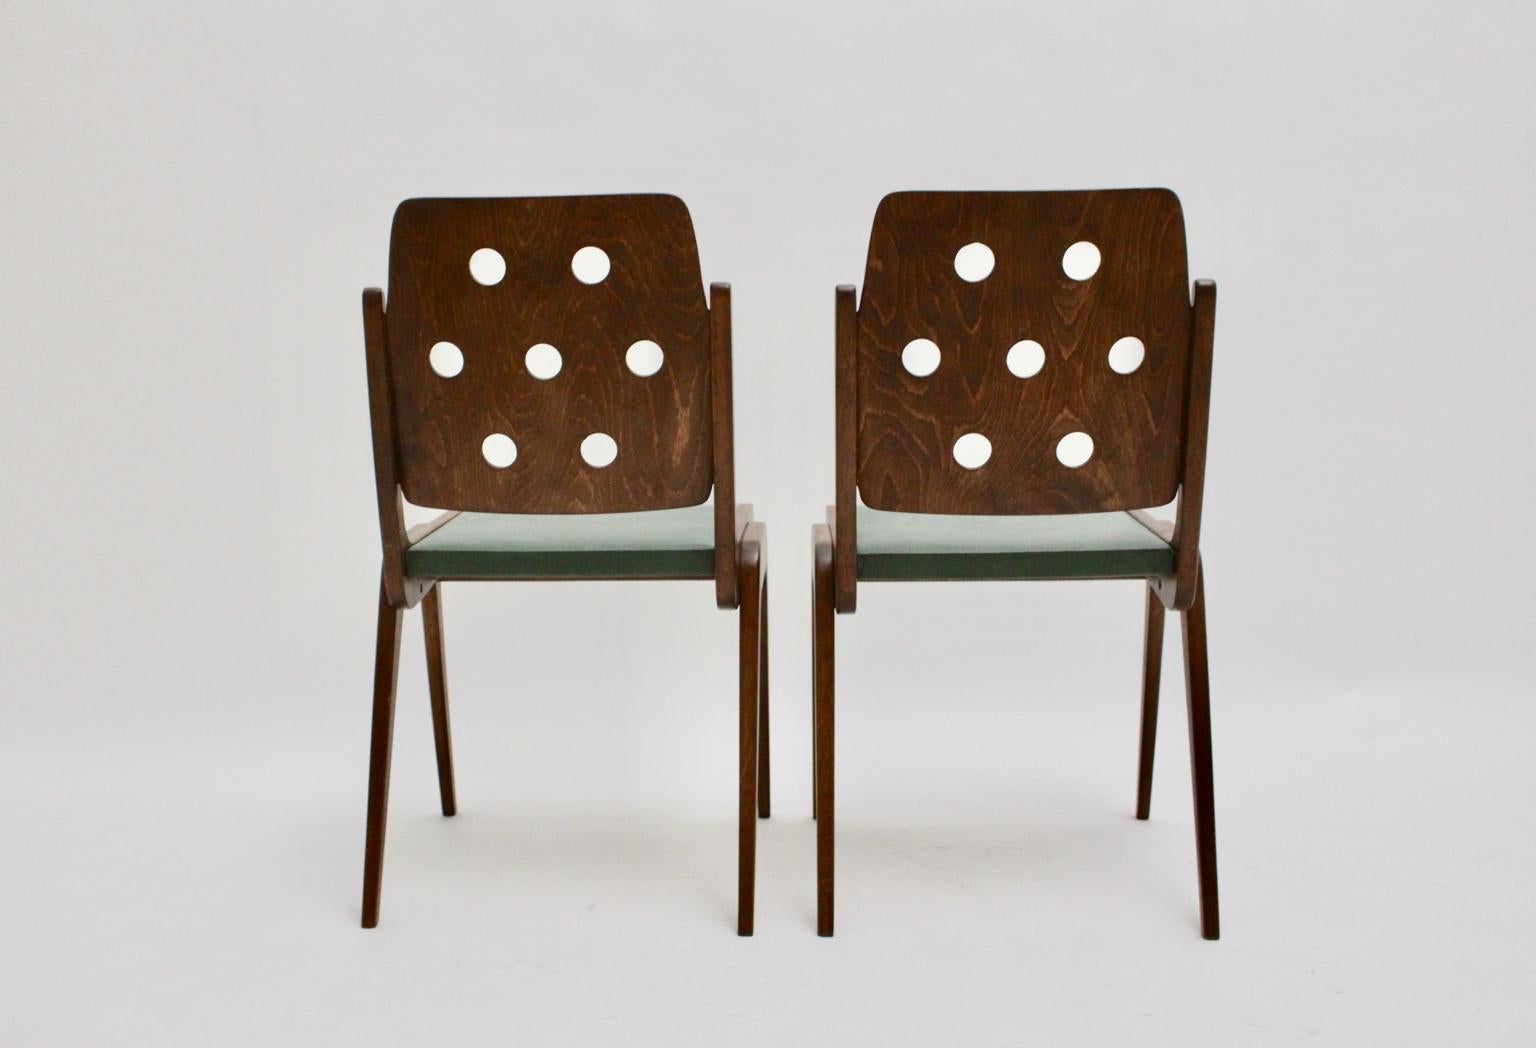 Mid-20th Century Mid-Century Modern Vintage Brown and Green Dining Chairs by Franz Schuster 1950s